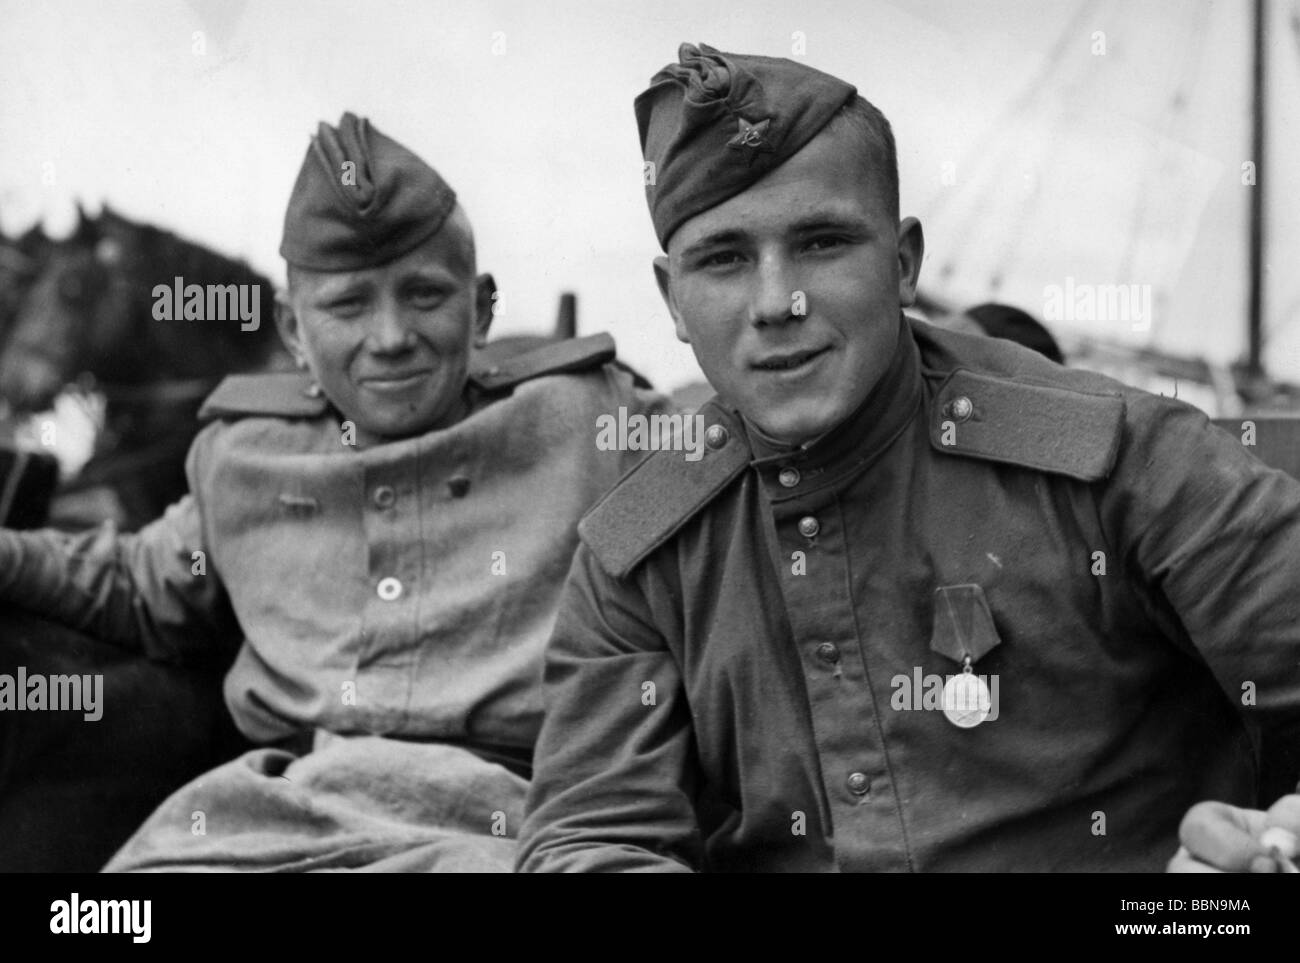 events, Second World War / WWII, Russia, persons, soldiers of the Red Army, circa 1942, Stock Photo